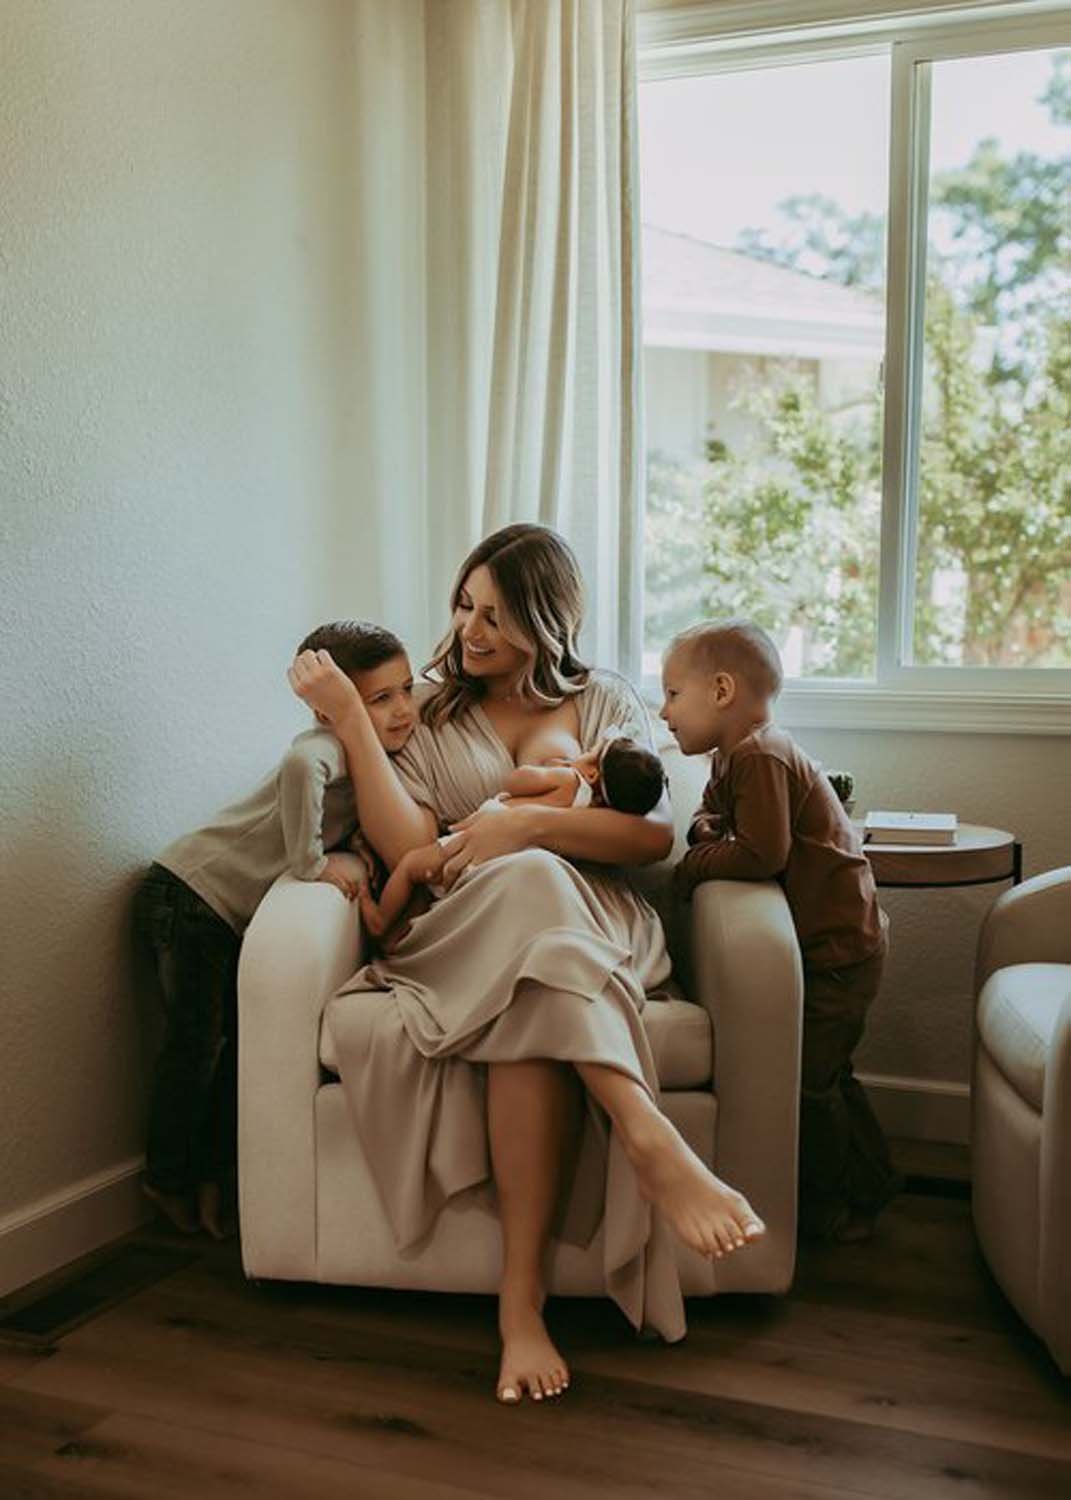 Woman with children feeding baby lifestyle family photography.jpg